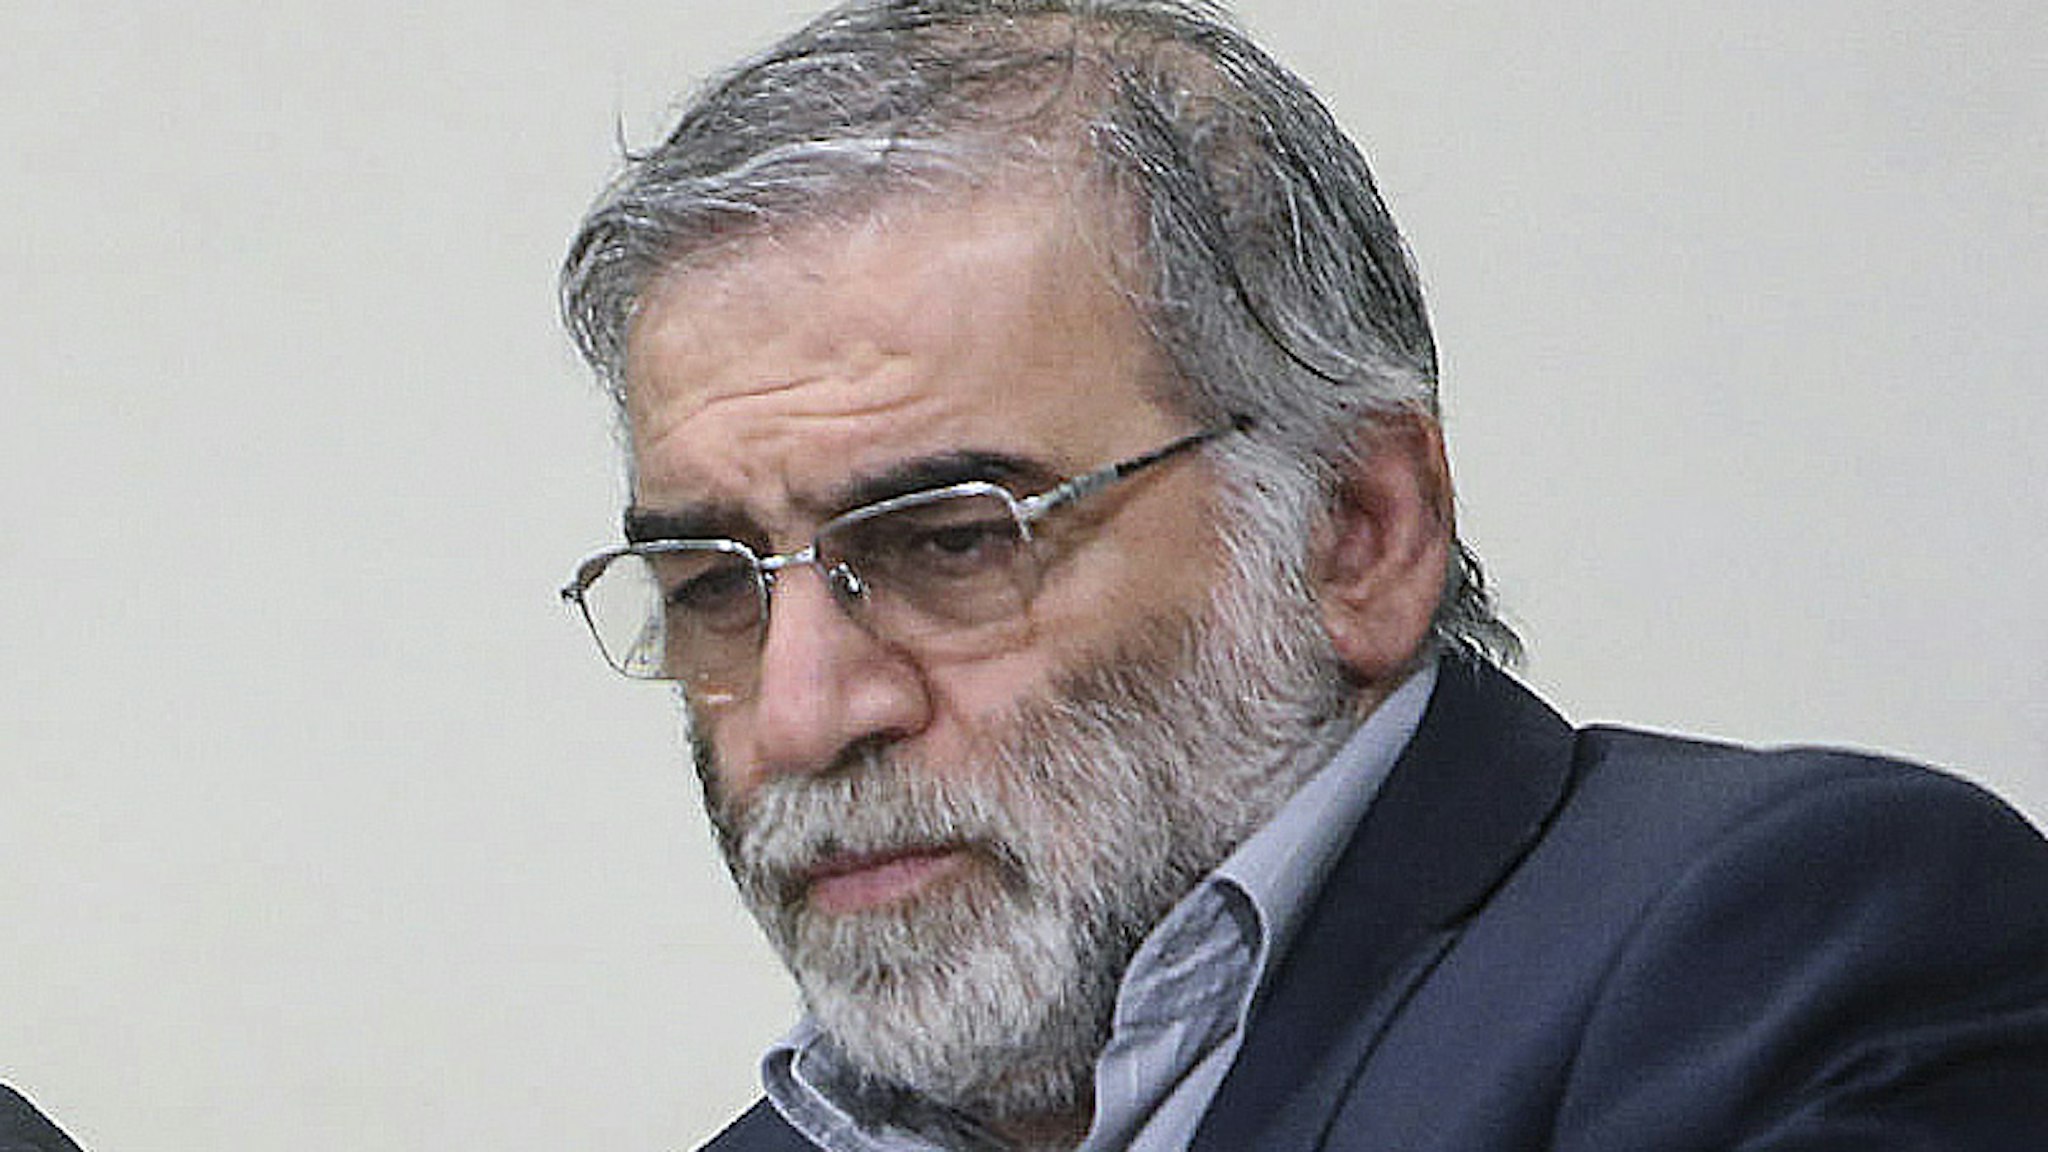 TEHRAN, IRAN - ARCHIVE: (----EDITORIAL USE ONLY - MANDATORY CREDIT - "Iranian Leader Press Office / HANDOUT" - NO MARKETING NO ADVERTISING CAMPAIGNS - DISTRIBUTED AS A SERVICE TO CLIENTS----) A file photo dated 23 January 2019 shows Iran's top nuclear scientist Mohsen Fakhrizadeh during a meeting. A leading Iranian nuclear scientist, Mohsen Fakhrizadeh, has been assassinated by unidentified gunmen on the outskirts of the capital Tehran on Friday, the countrys foreign minister said.